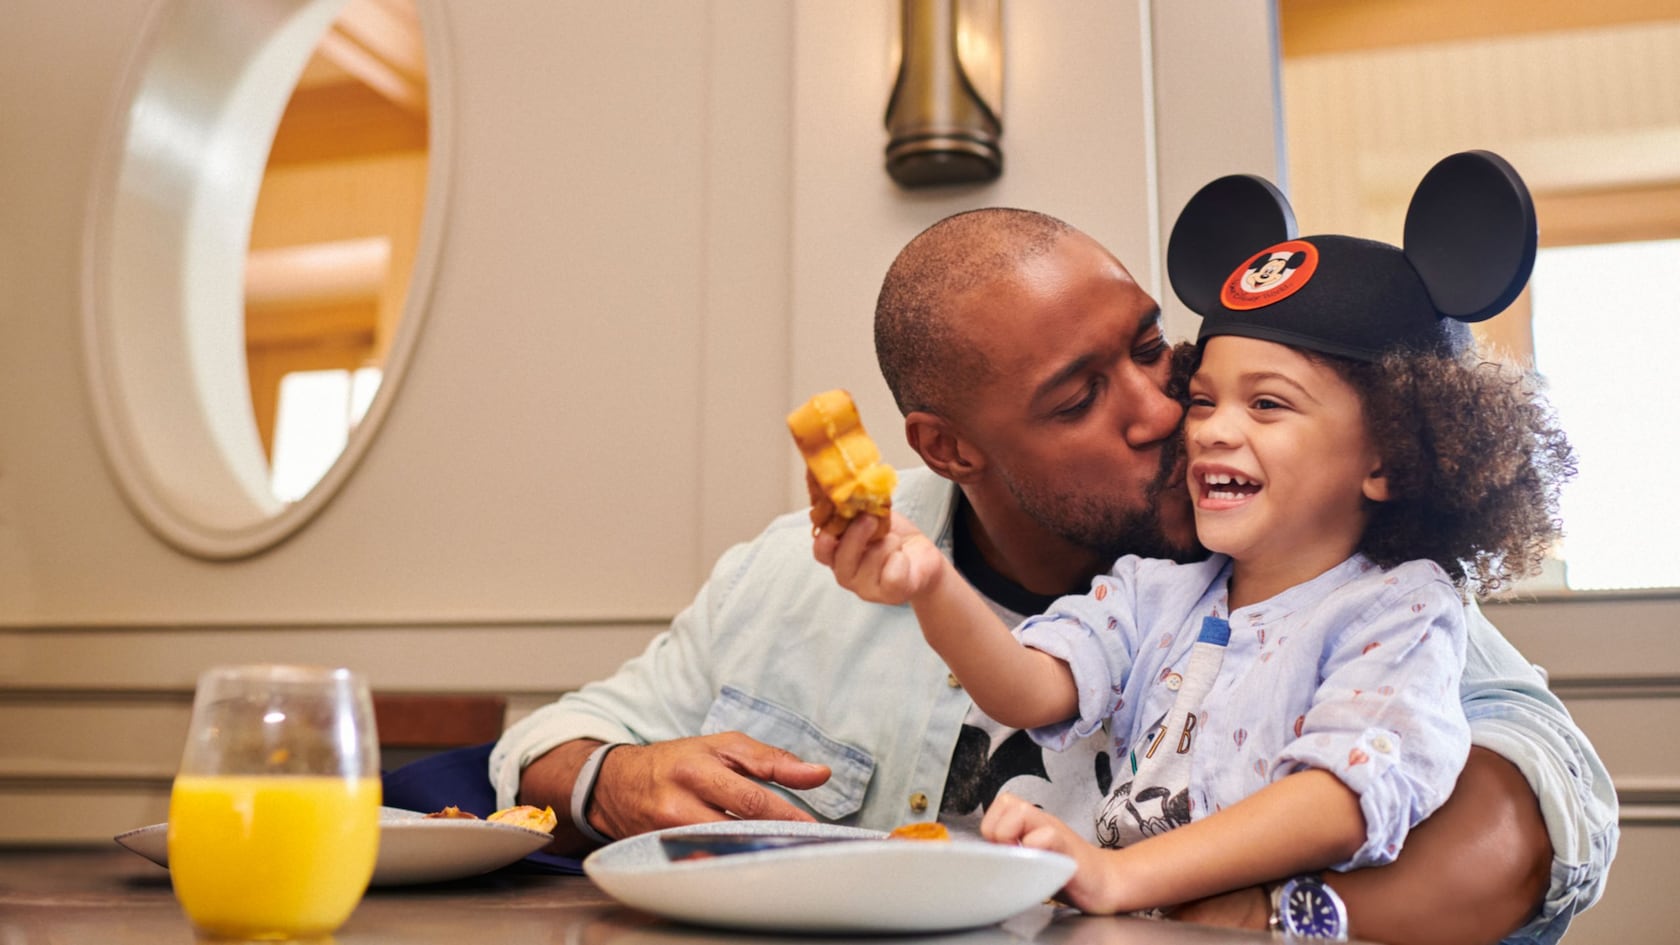 A man kisses a child on a cheek while sitting at a table with orange juice and Mickey waffles